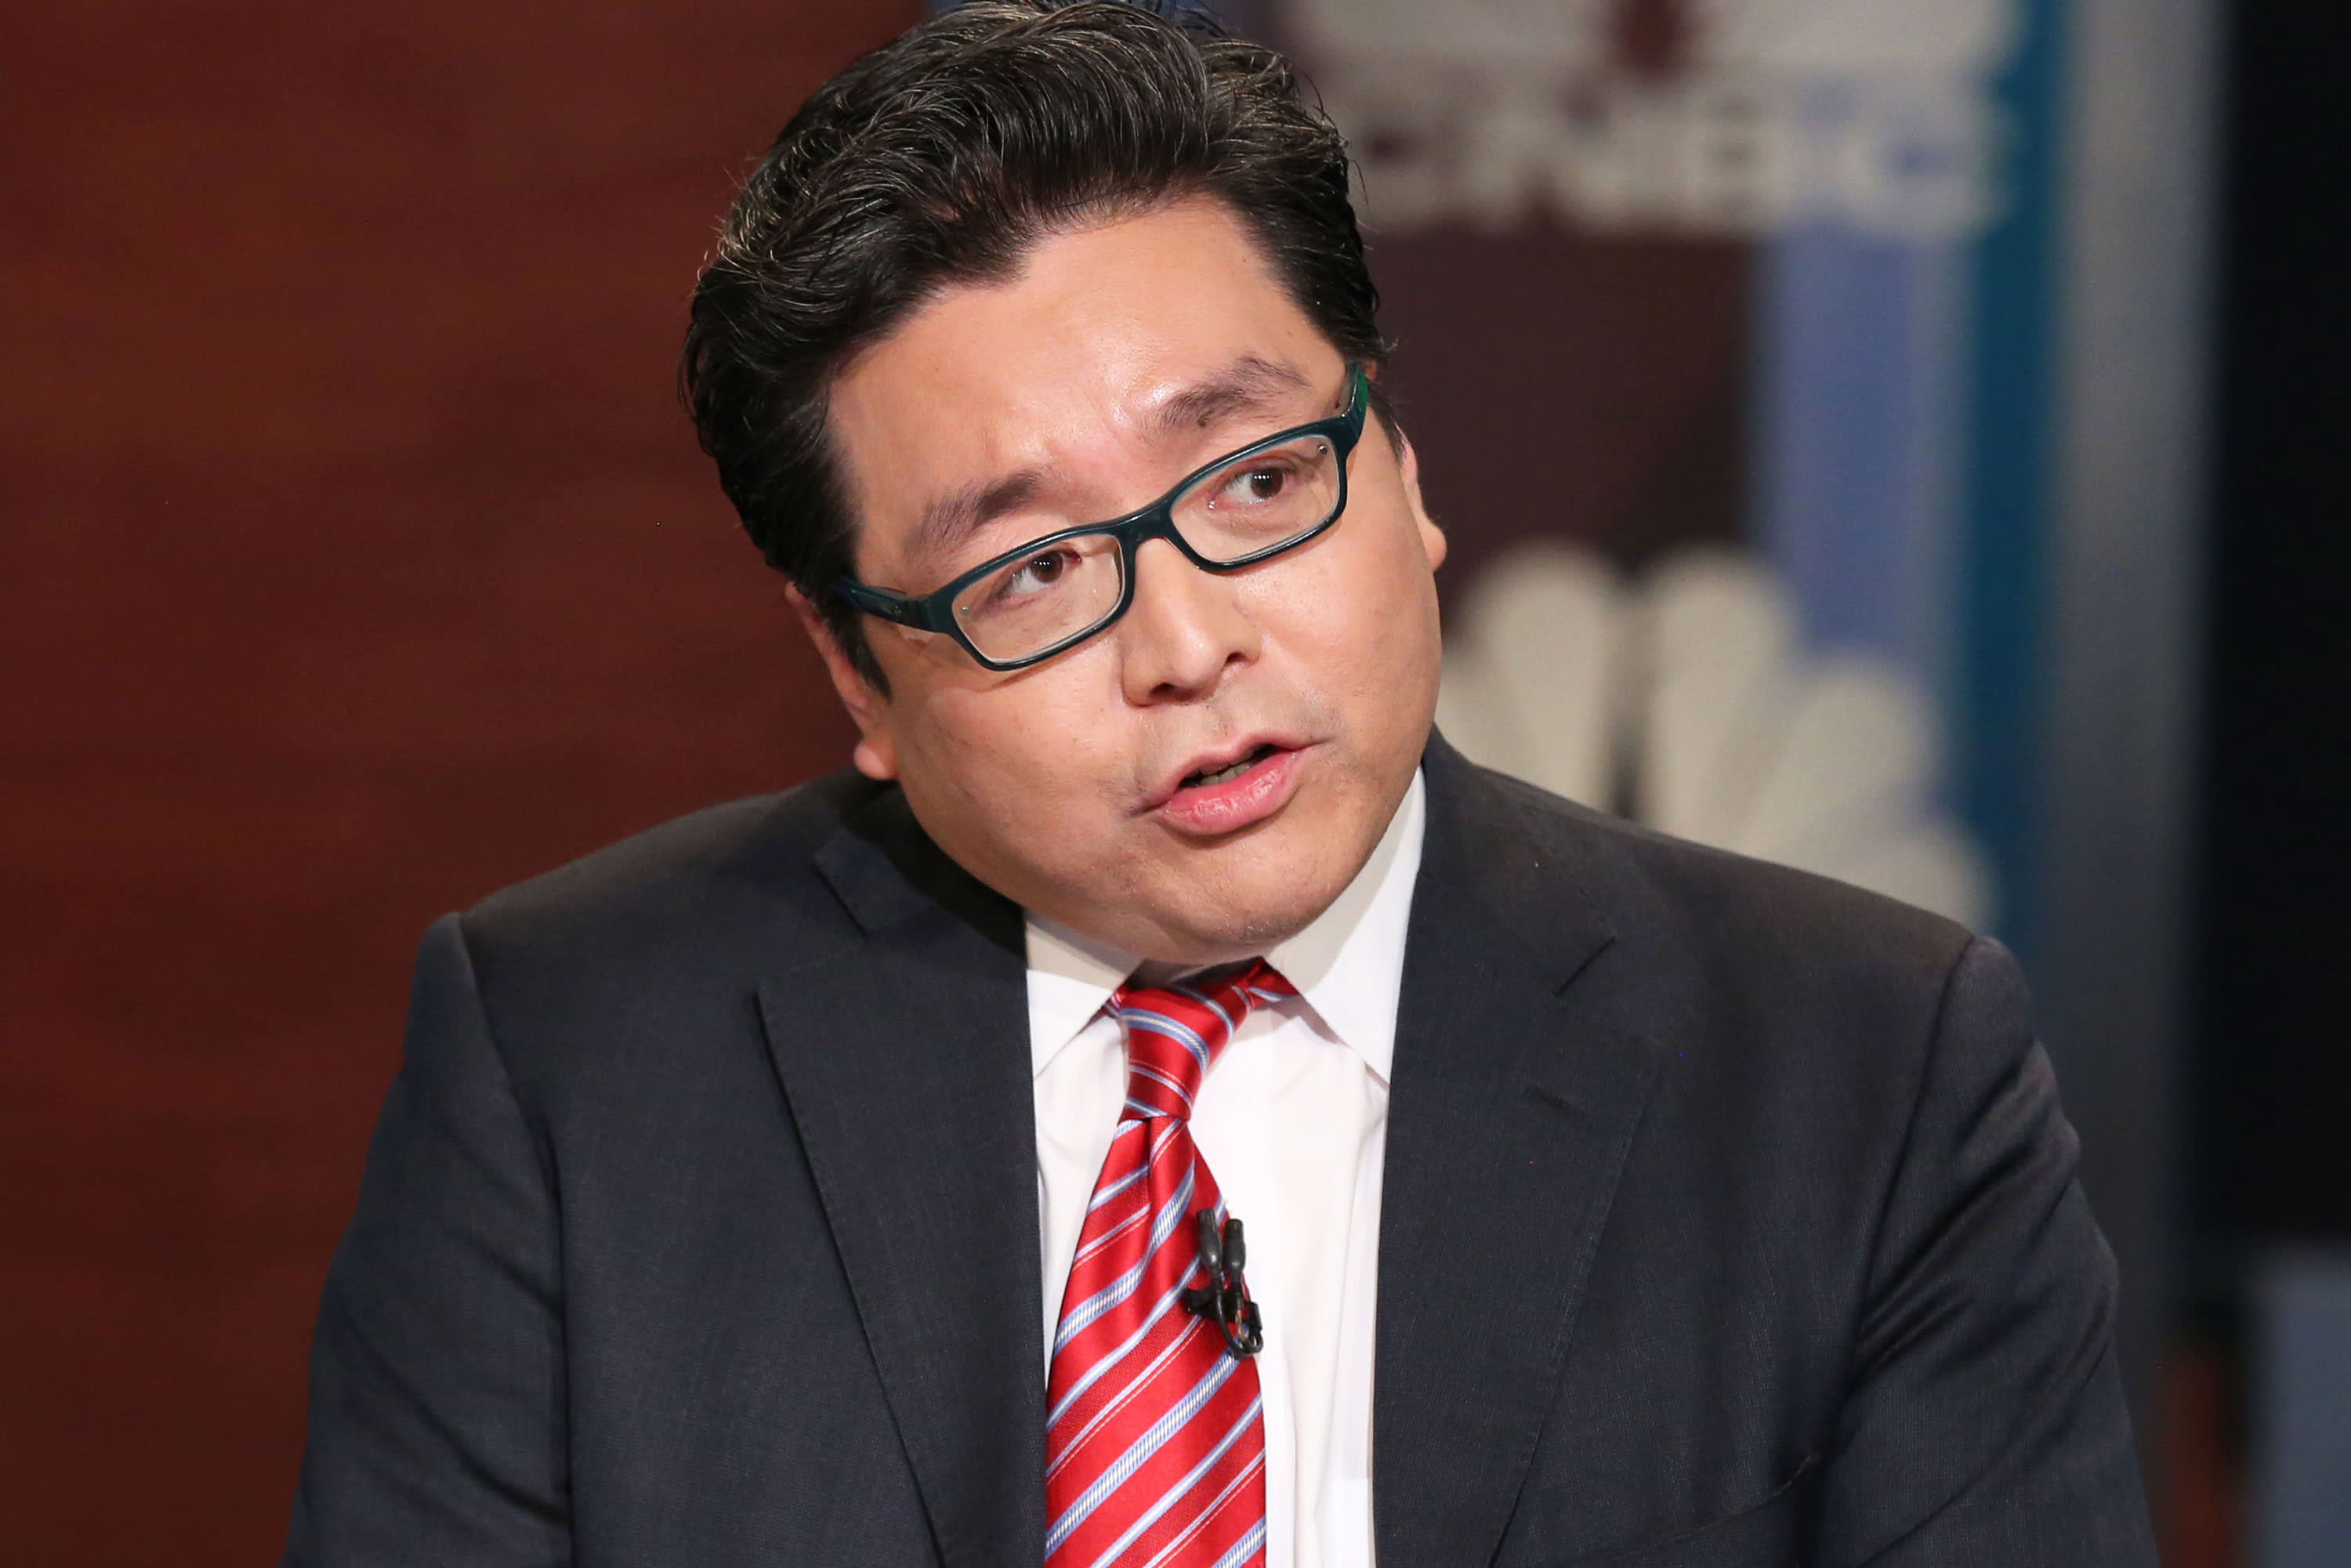 Tom Lee, who nailed the inflation call, reveals what the market needs to hit all-time highs